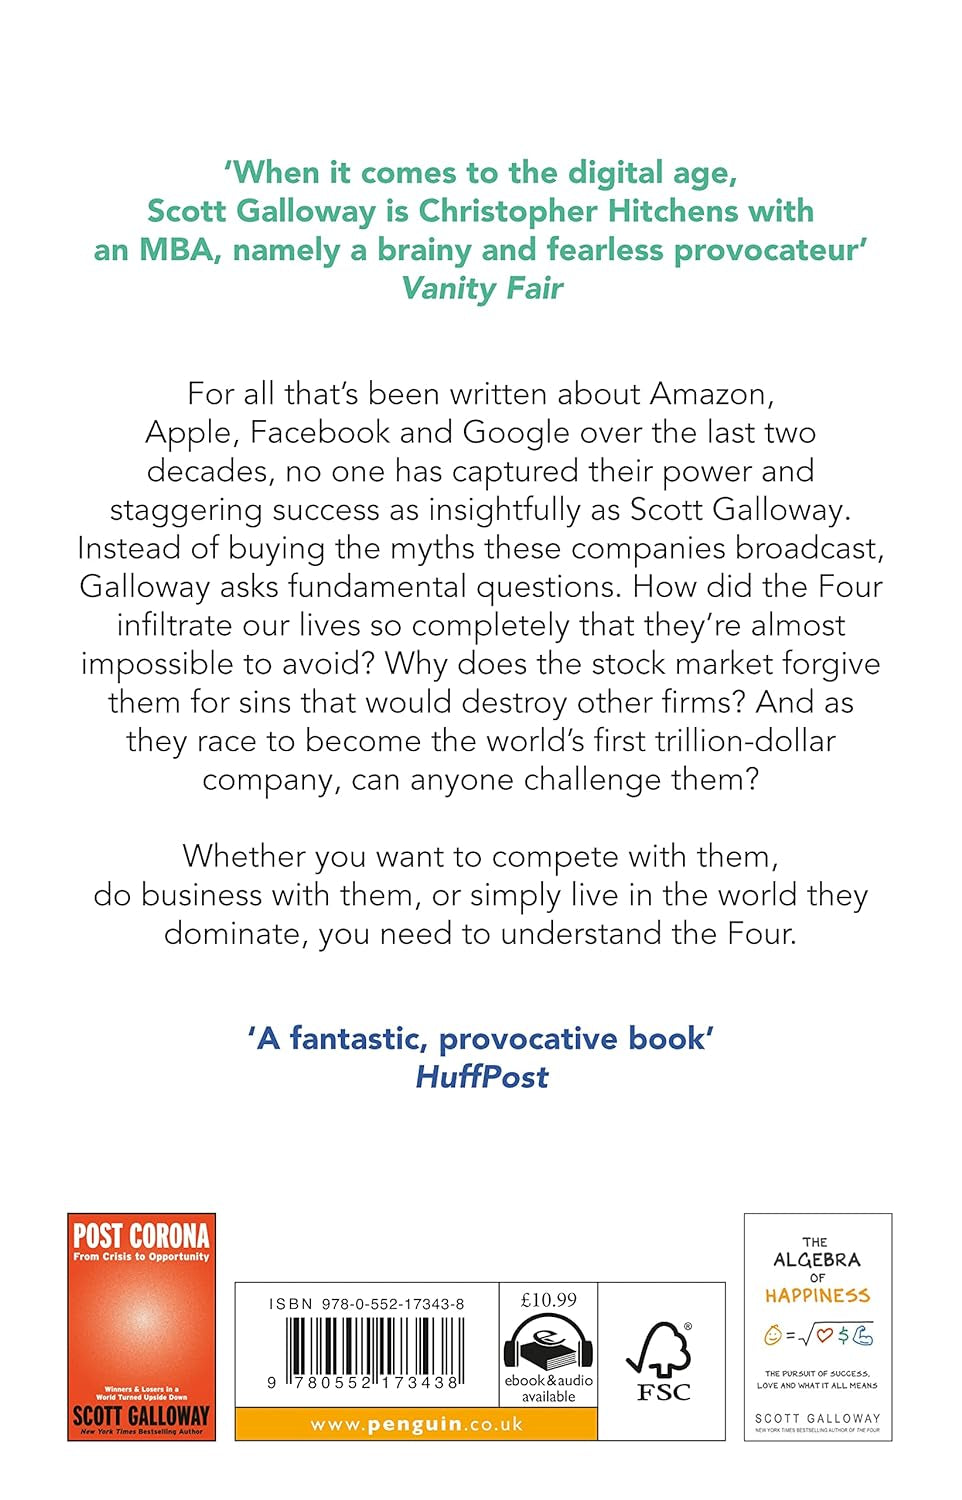 The Four: the Hidden DNA of Amazon, Apple, Facebook and Google